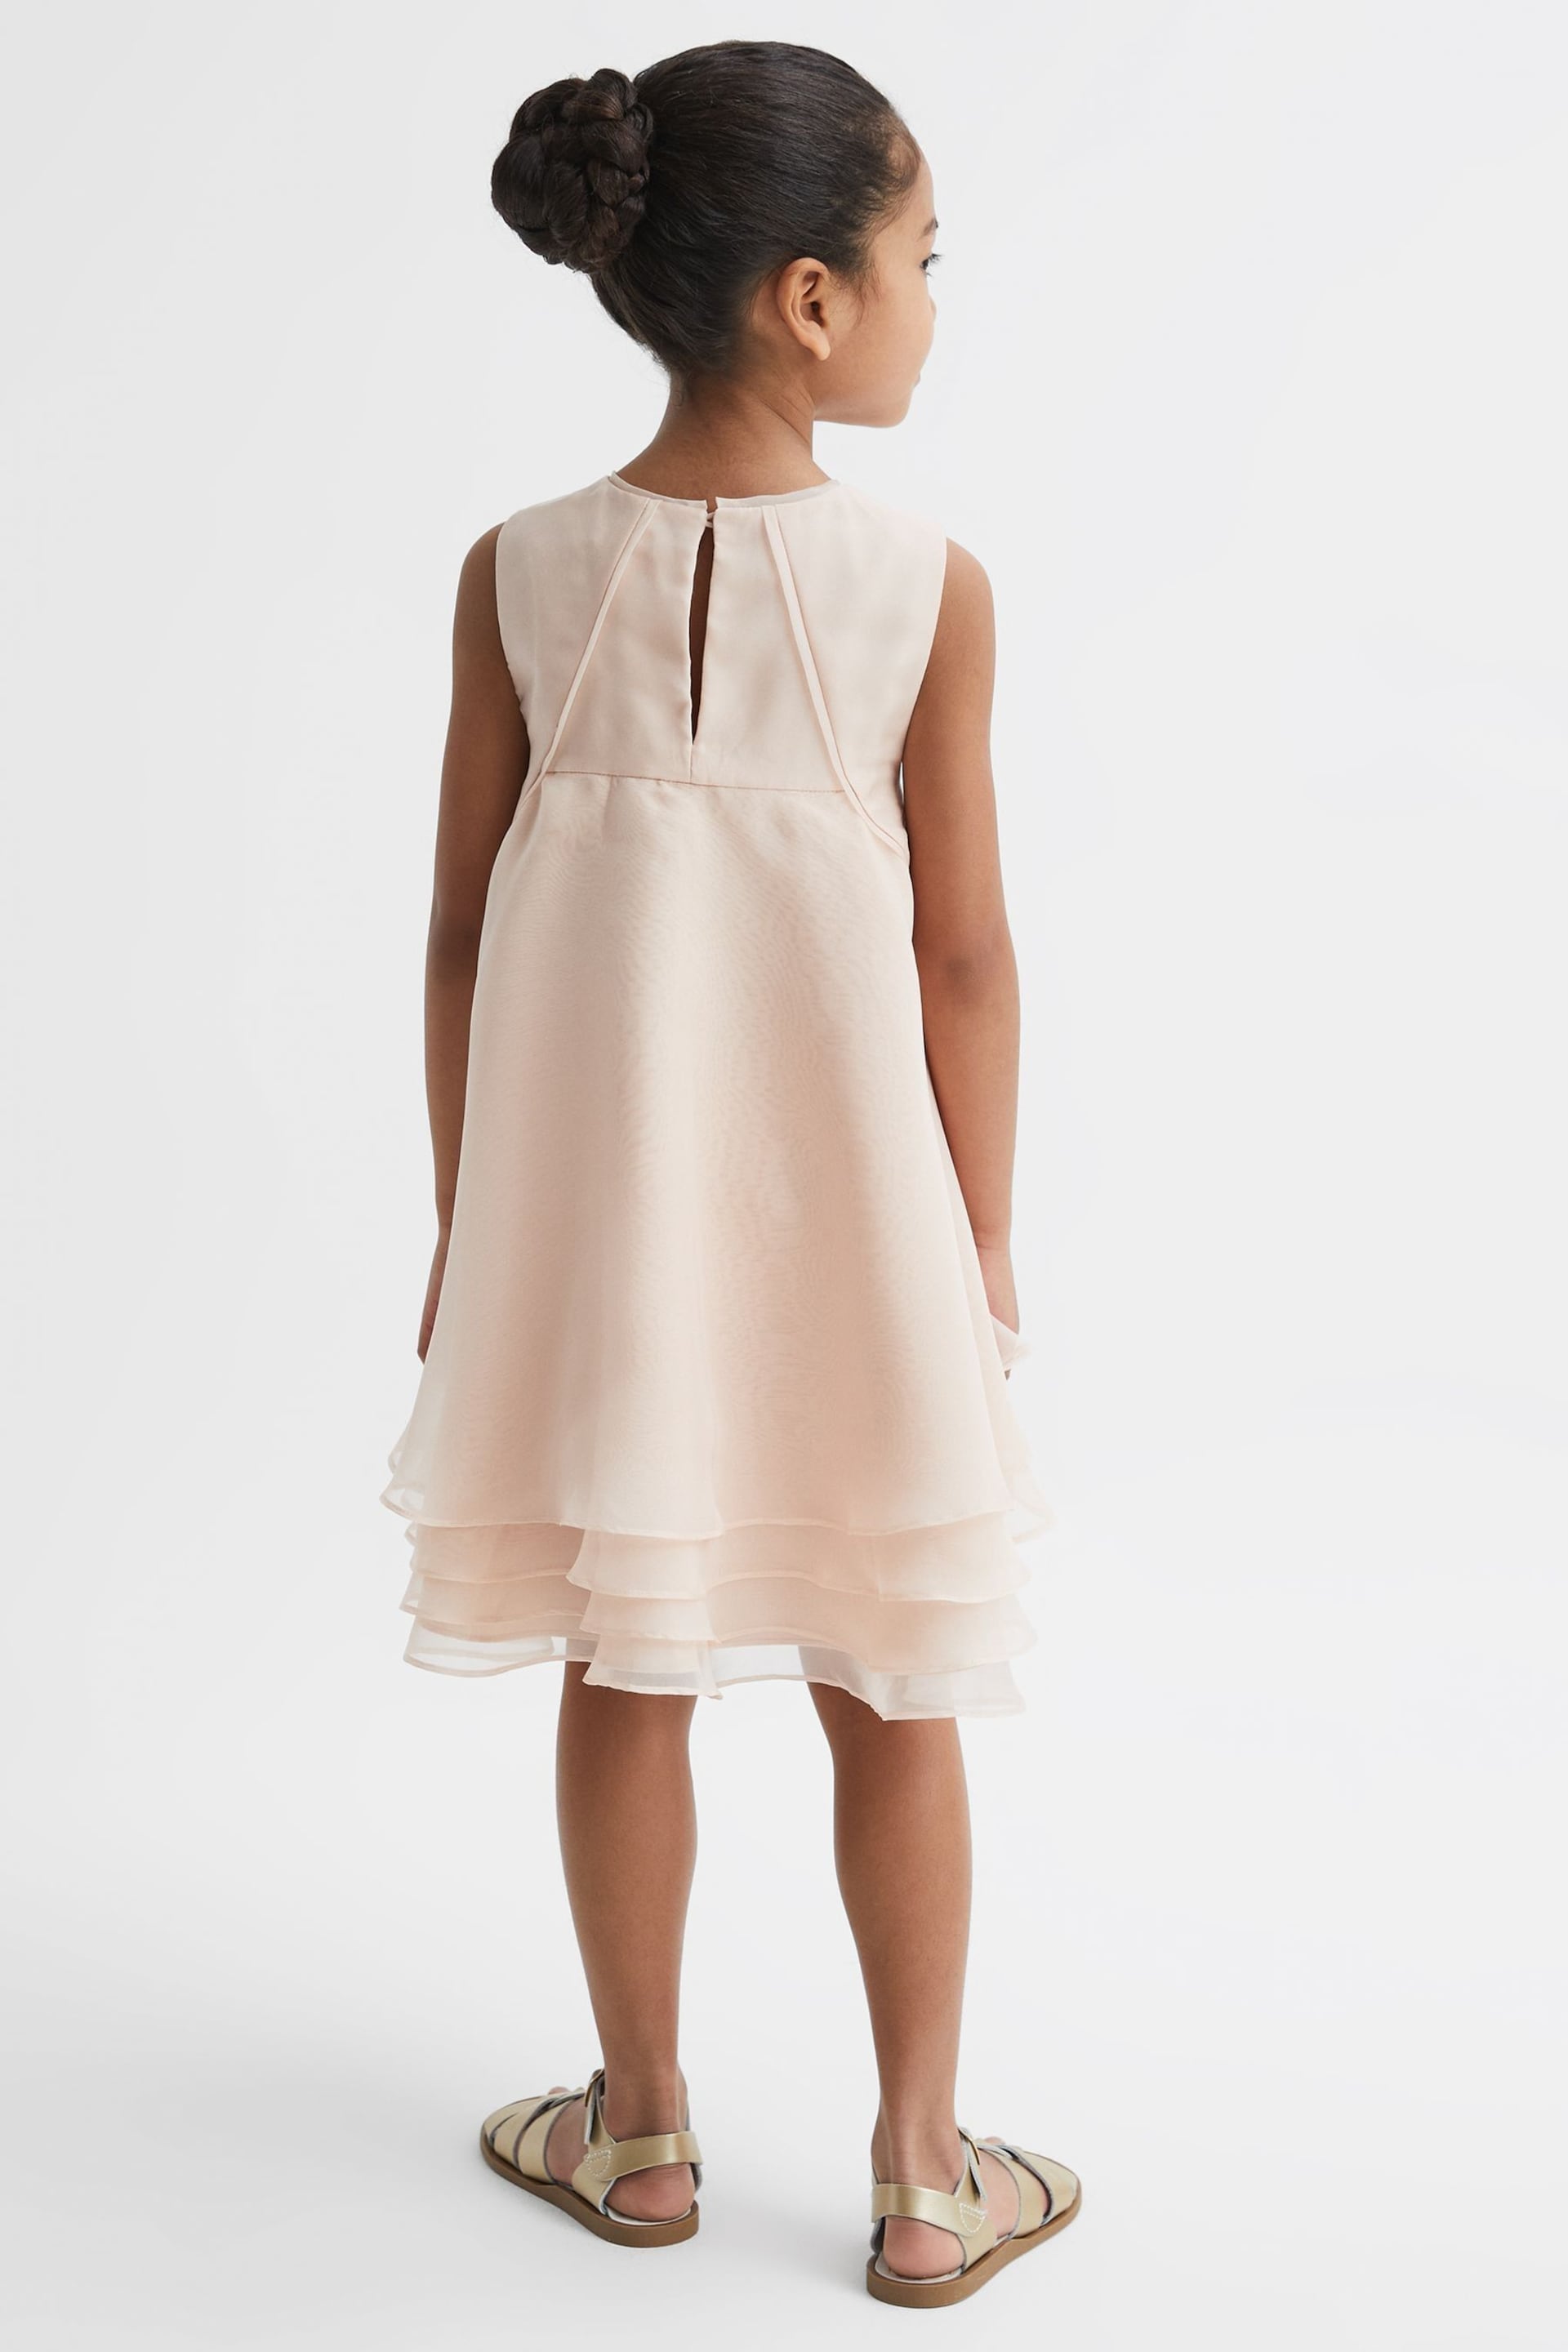 Reiss Pink Alexis Junior Layered Tulle Dress - Image 5 of 6